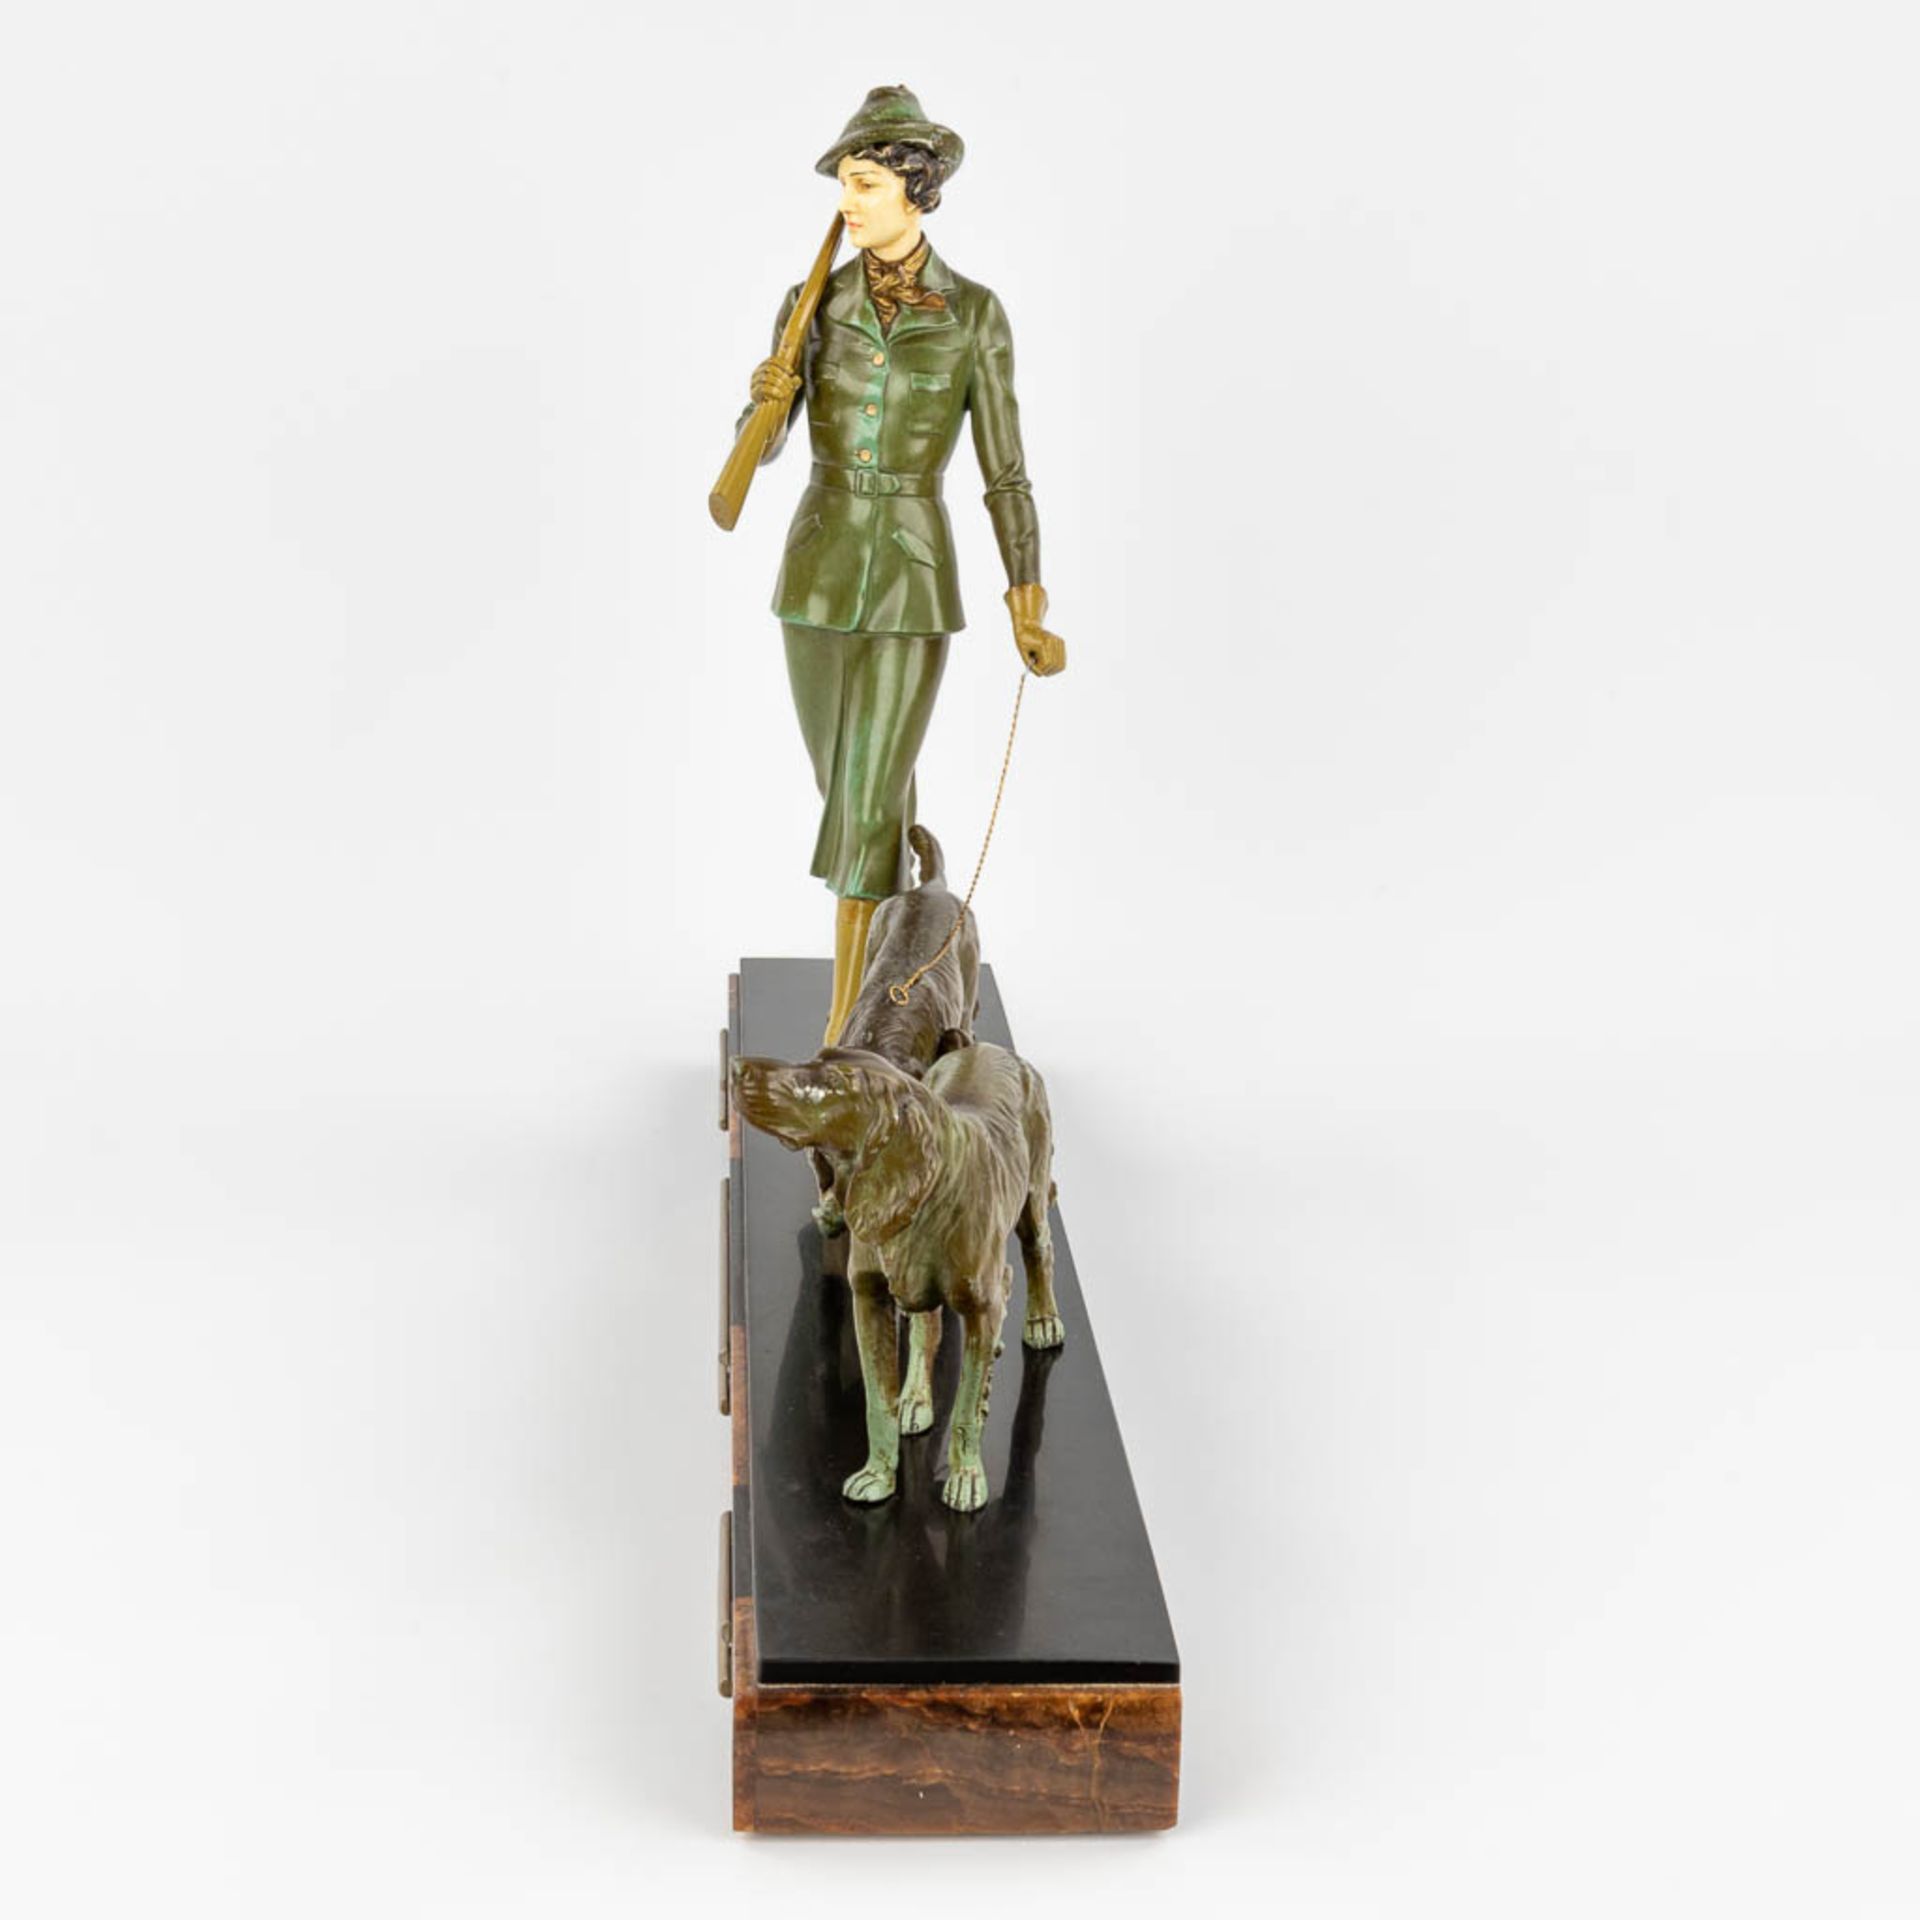 'Depart Pour La Chasse', a statue made in art deco style of marble and spelter. (12 x 67 x 45cm) - Image 2 of 13